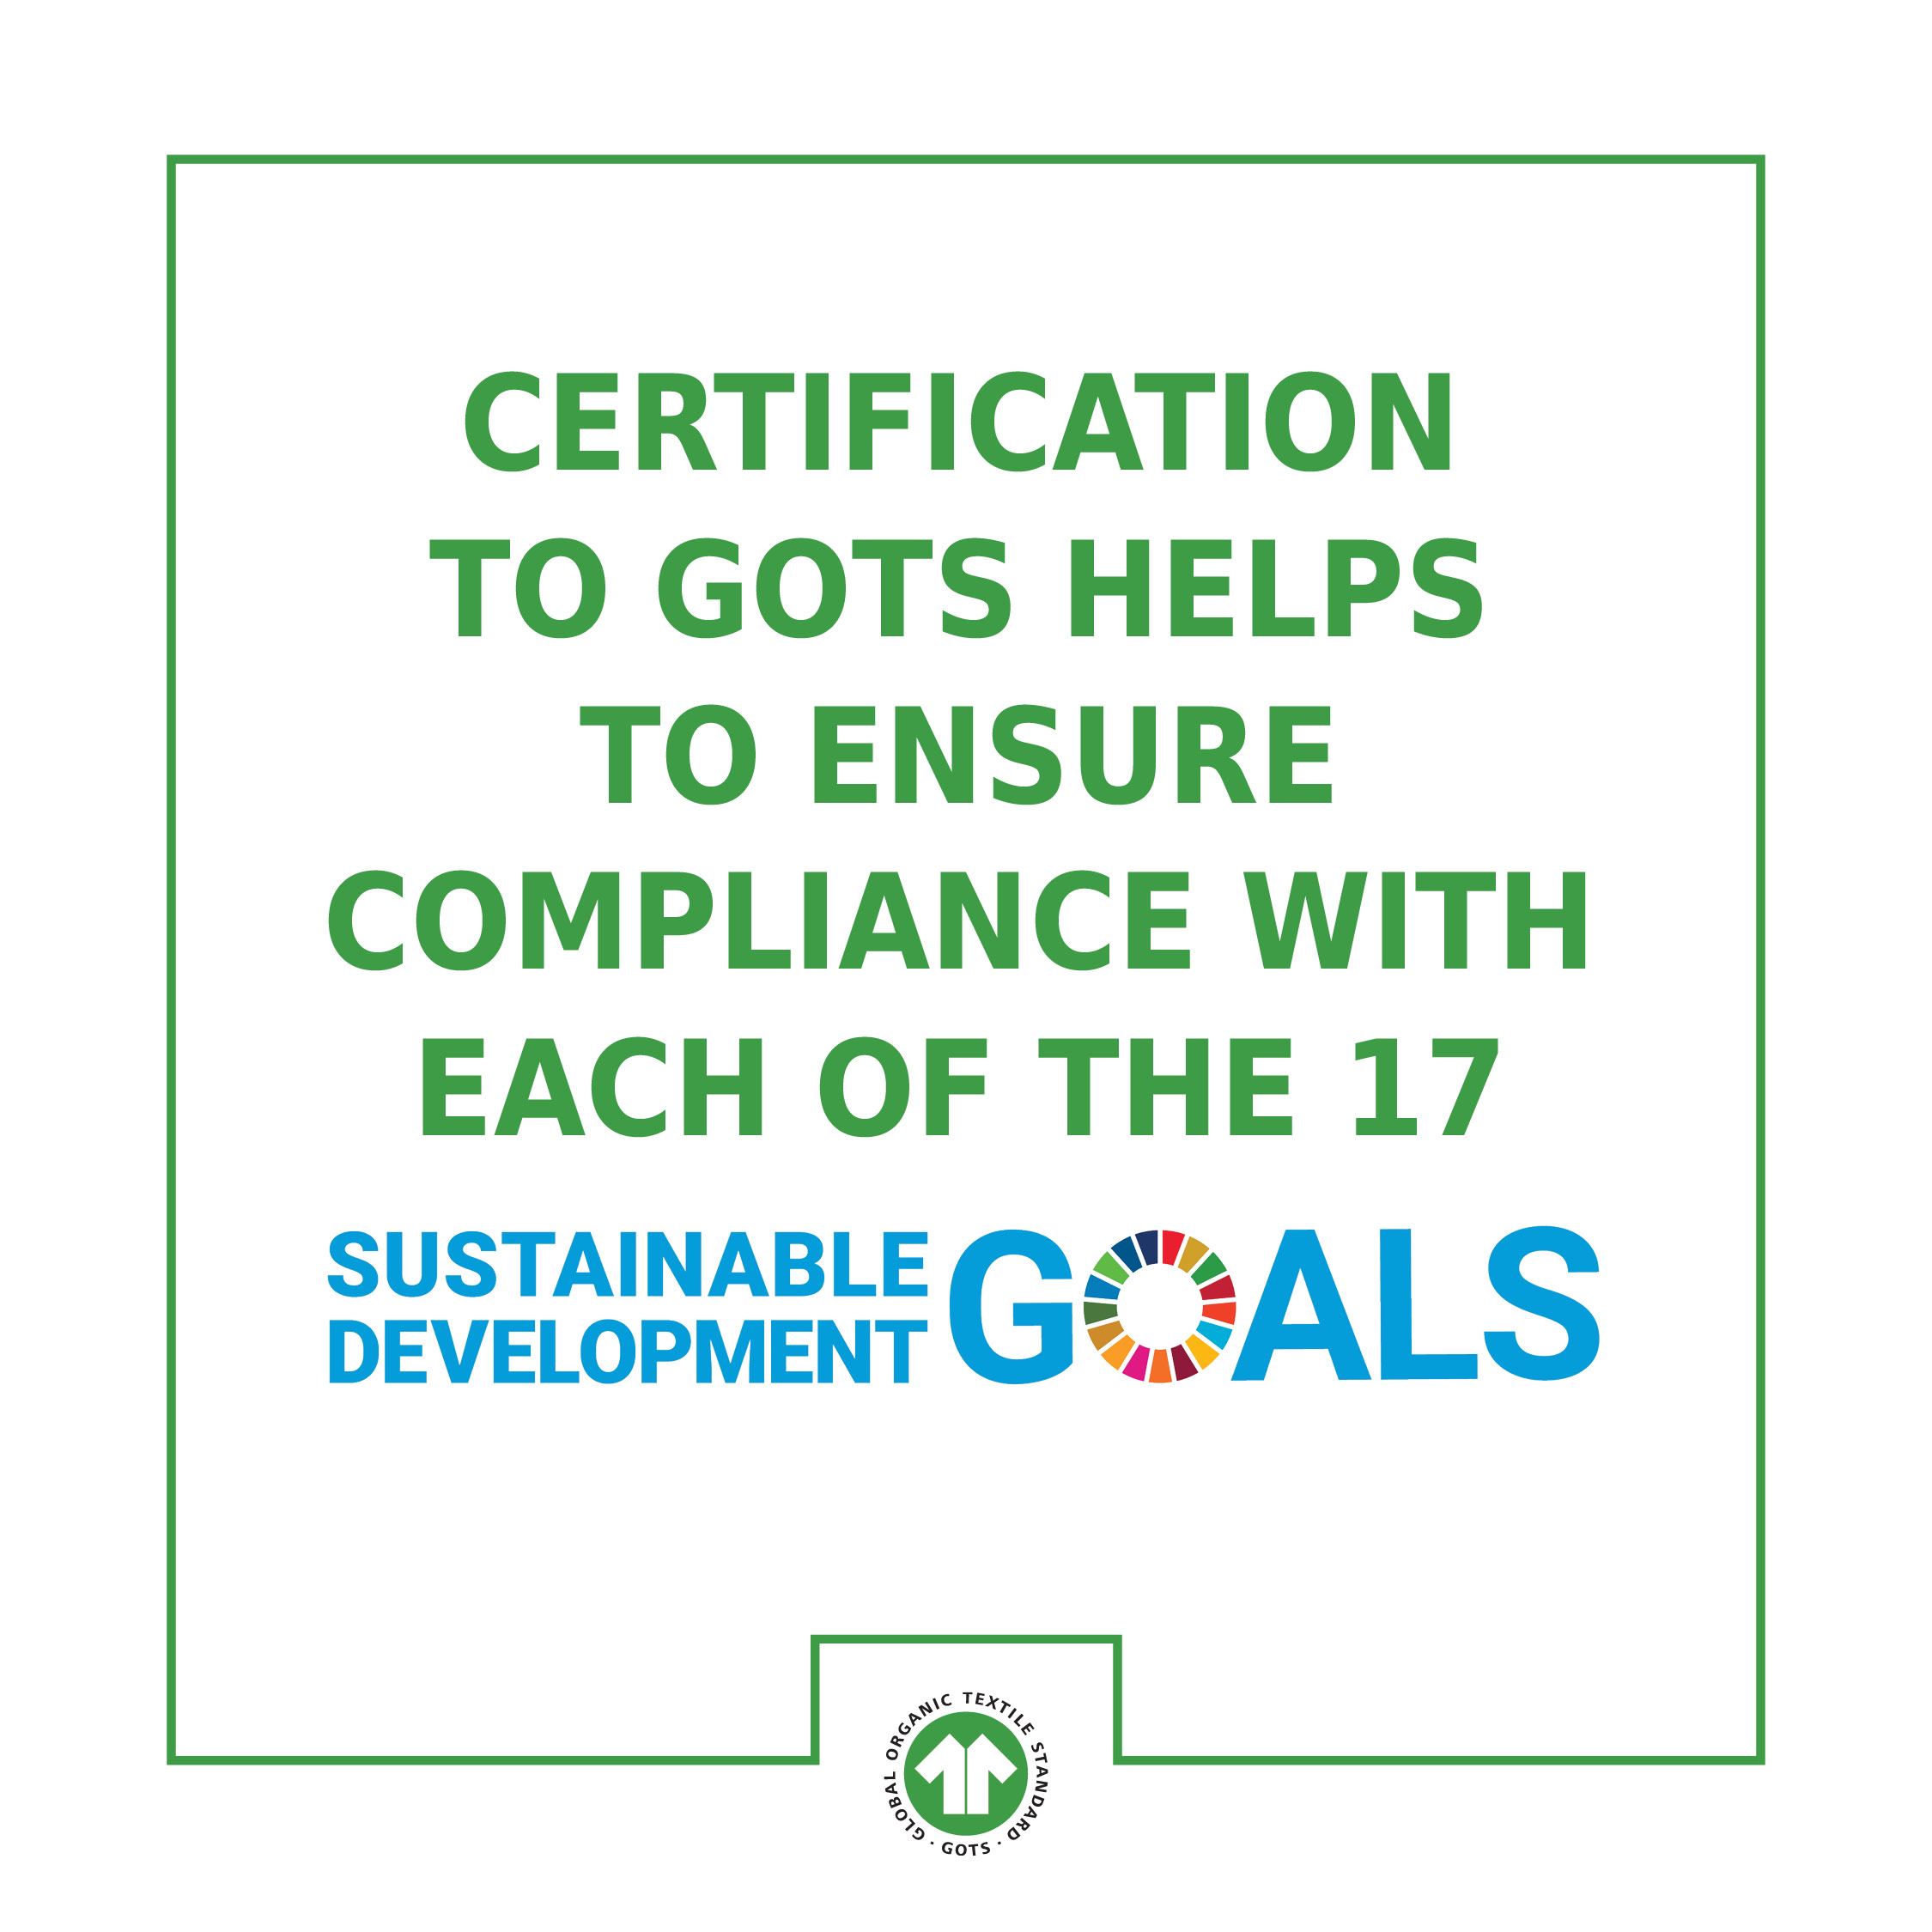 Graphic how GOTS supports the 17 Sustainable Development Goals